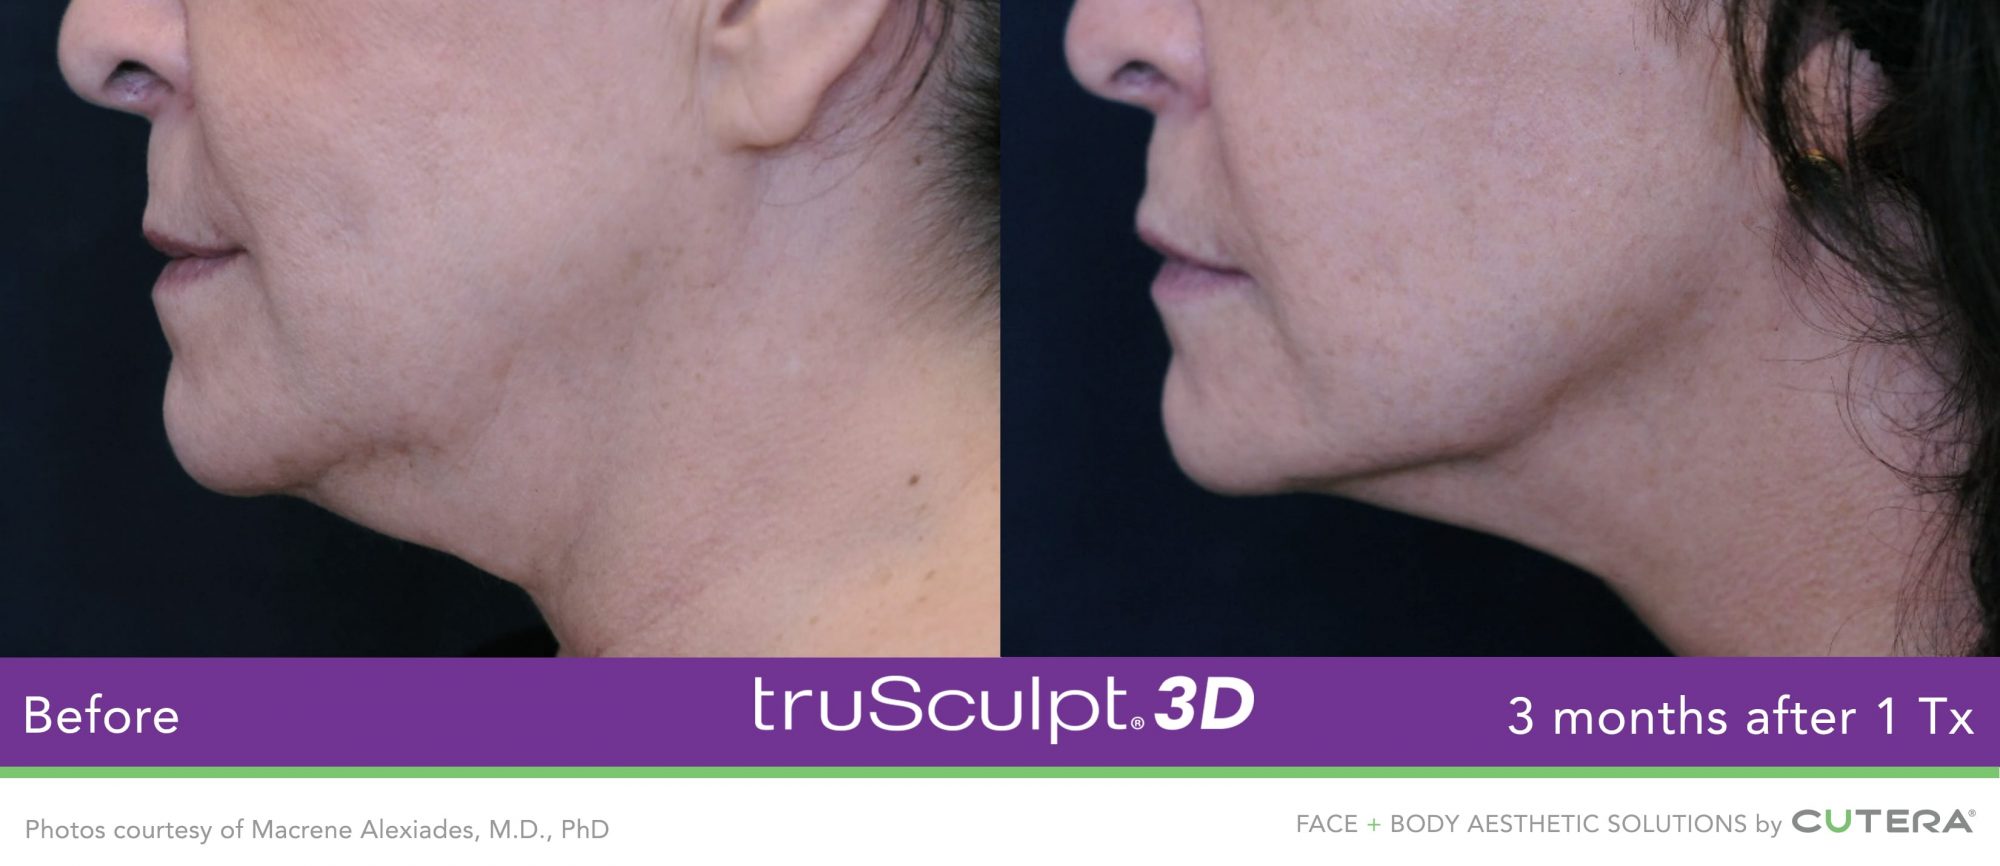 woman's chin before and after truSculpt 3D